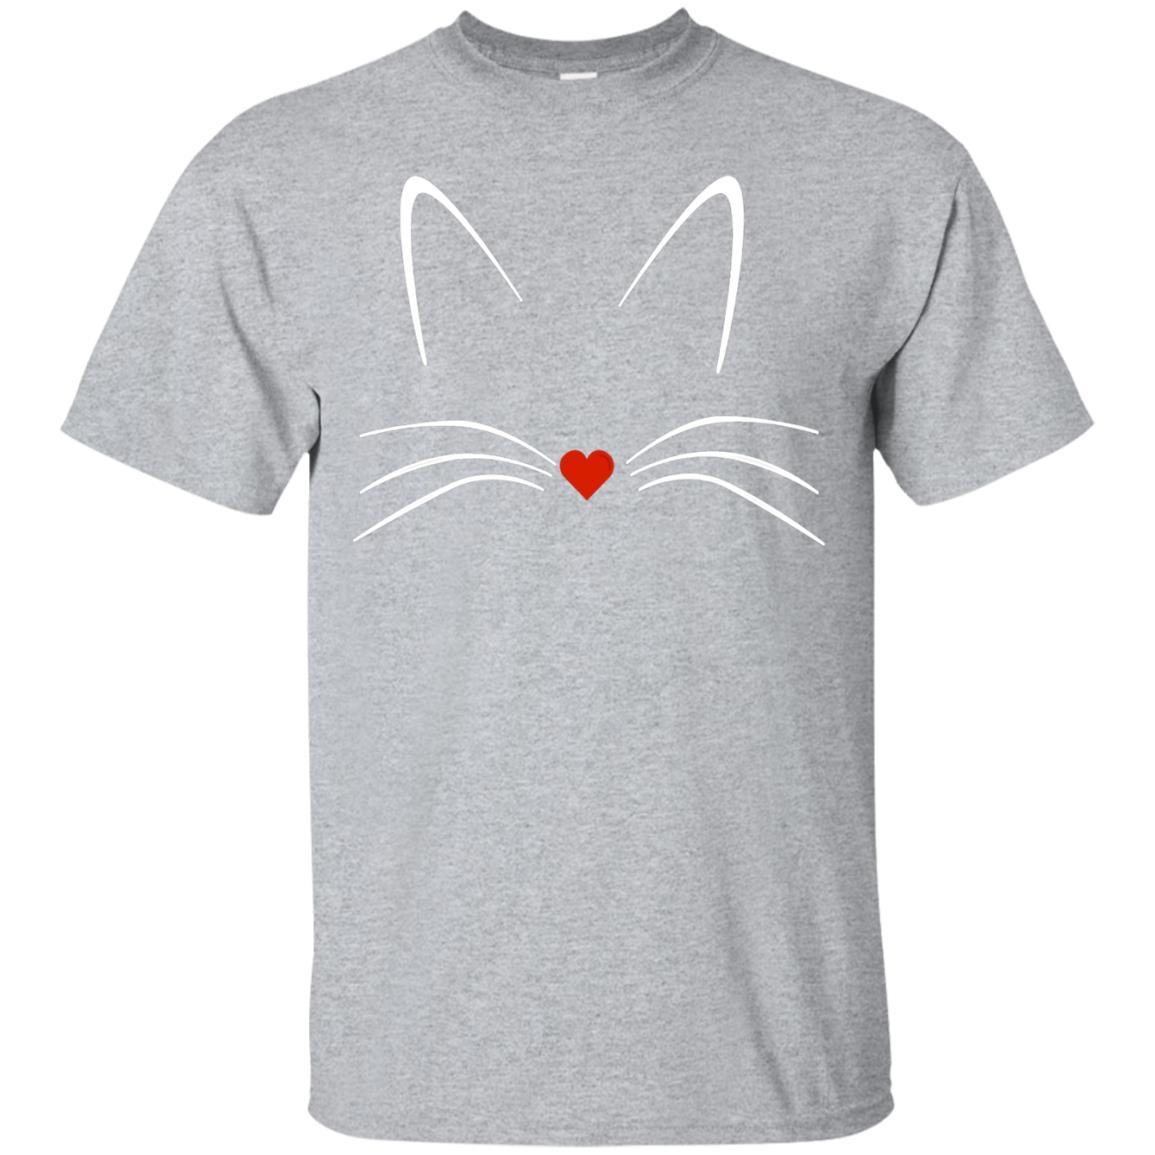 Cute Cat Face Outline Tshirt Cat Whiskers and Ears